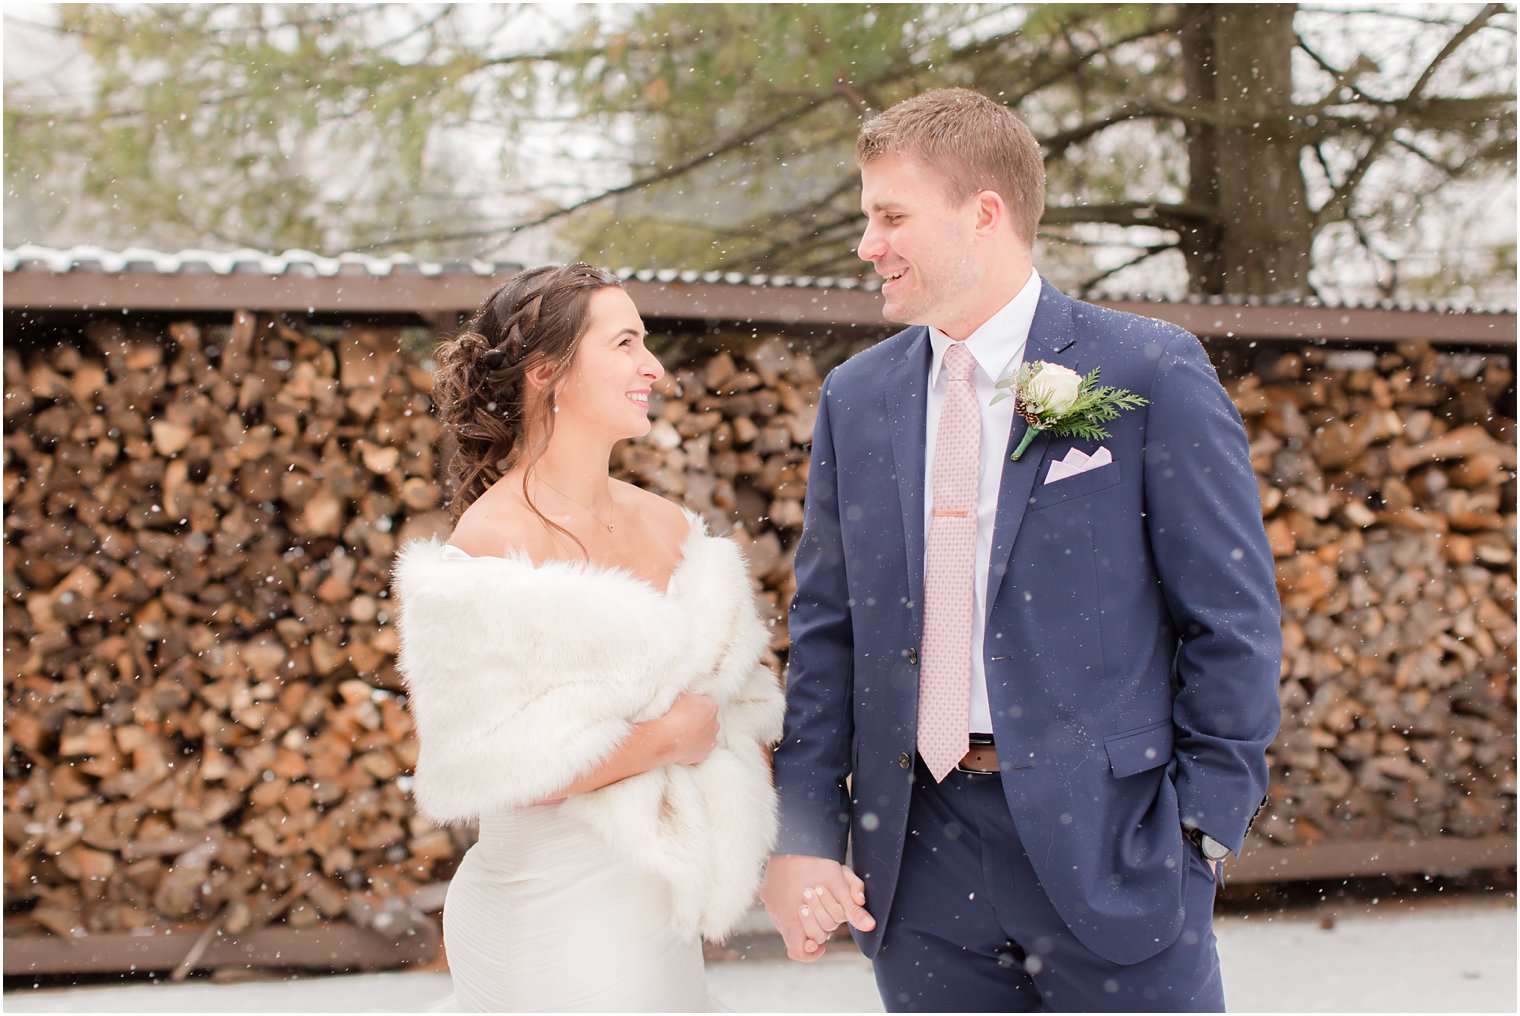 Winter wedding with rose gold and navy | Stone House at Stirling Ridge in Warren, NJ